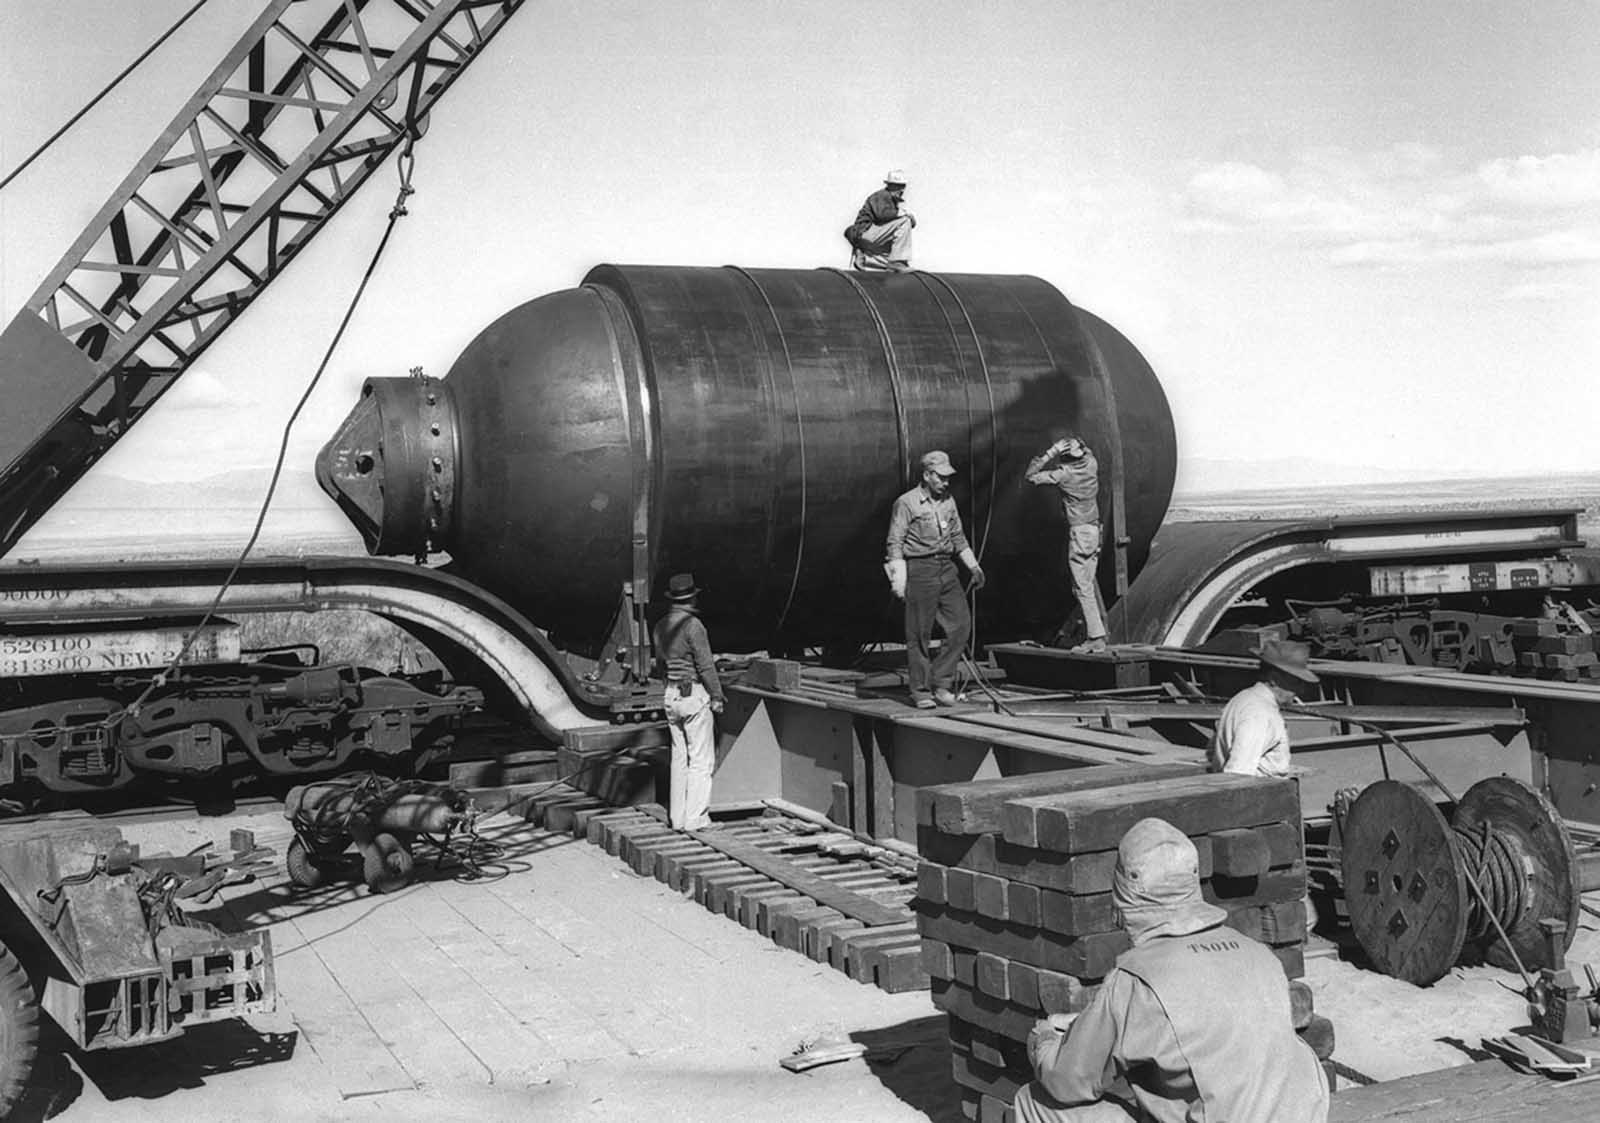 umbo, a 200-ton steel canister designed to recover the plutonium used in the Trinity test in the event that the explosives used were unable to trigger a chain reaction. In the end, Jumbo wasn't used for recovery, but was placed near ground zero to help gauge the effects of the blast. It survived intact, but its support tower did not.